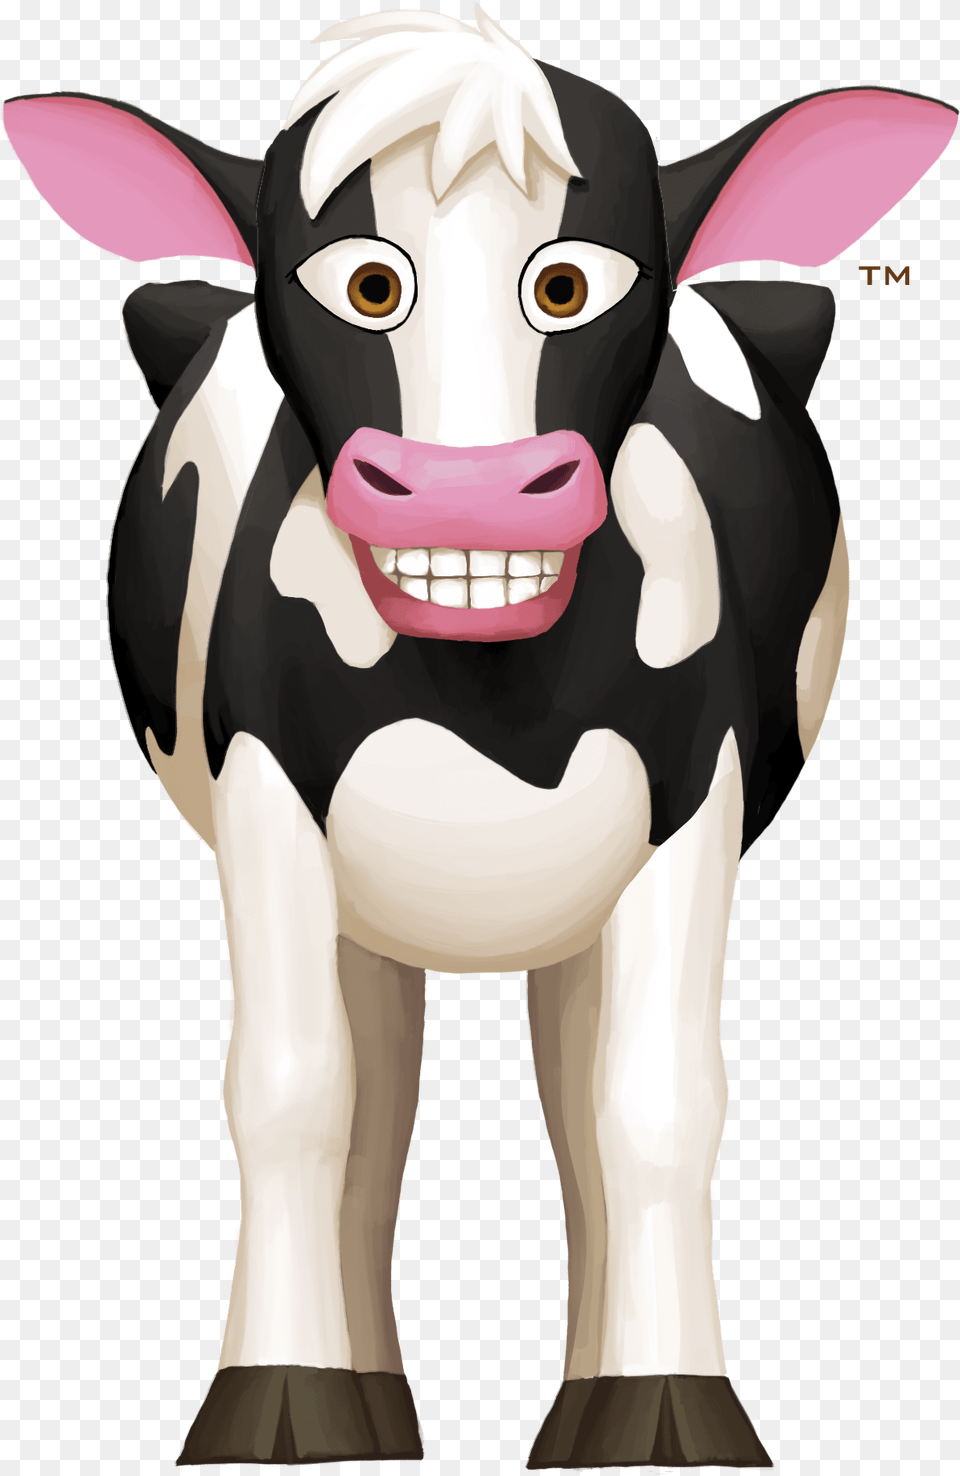 Angry Cow Clipart Full Size Clipart Pinclipart Angry Cow Cartoon, Animal, Cattle, Livestock, Mammal Png